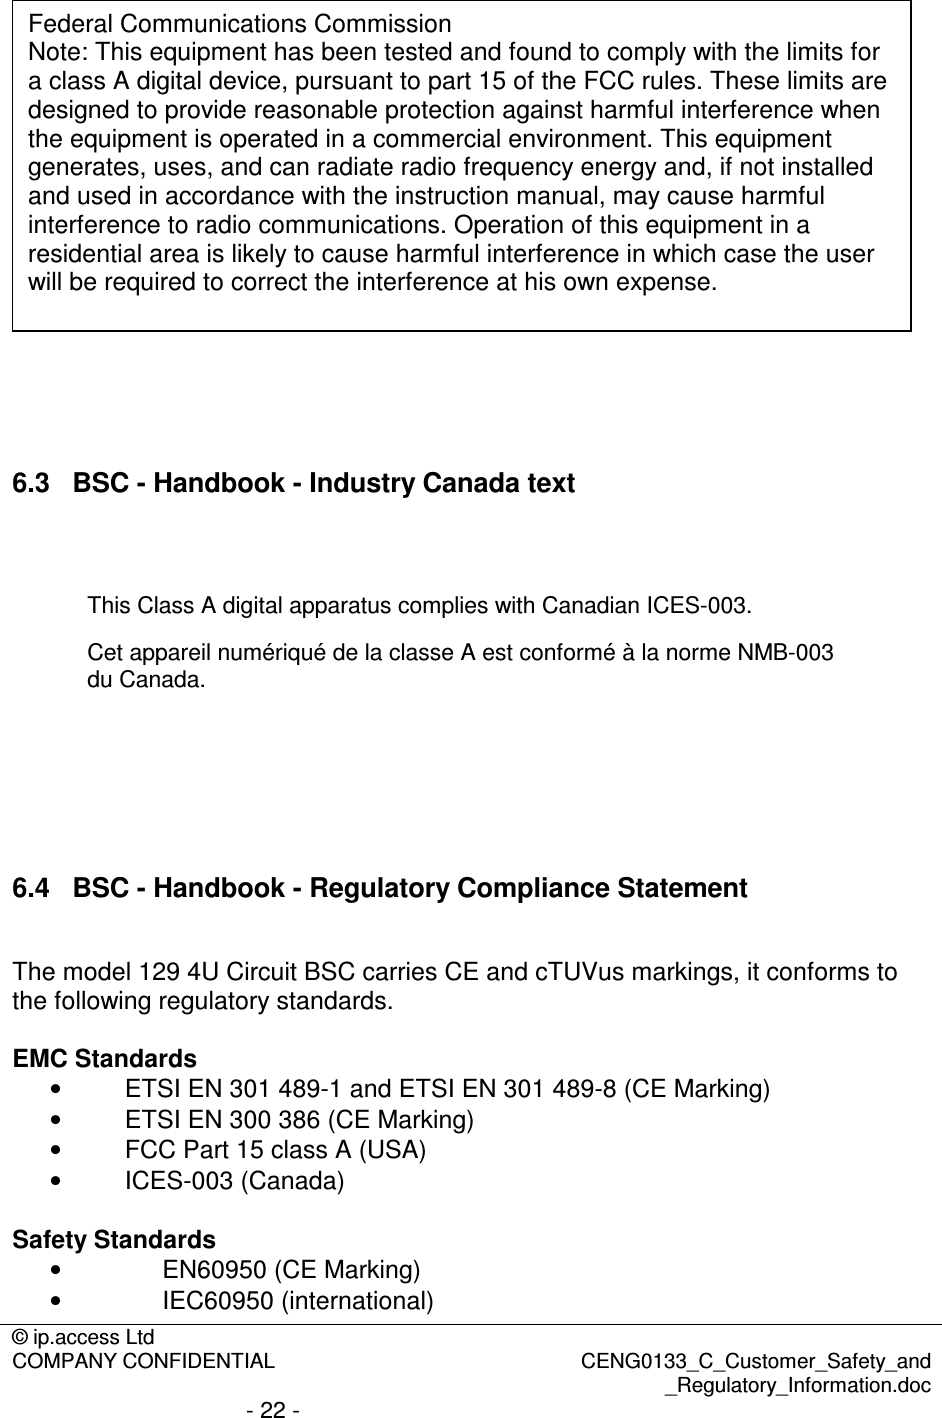 © ip.access Ltd  COMPANY CONFIDENTIAL  CENG0133_C_Customer_Safety_and _Regulatory_Information.doc - 22 -    6.3  BSC - Handbook - Industry Canada text   This Class A digital apparatus complies with Canadian ICES-003. Cet appareil numériqué de la classe A est conformé à la norme NMB-003 du Canada.      6.4  BSC - Handbook - Regulatory Compliance Statement  The model 129 4U Circuit BSC carries CE and cTUVus markings, it conforms to the following regulatory standards.  EMC Standards •  ETSI EN 301 489-1 and ETSI EN 301 489-8 (CE Marking) •  ETSI EN 300 386 (CE Marking) •  FCC Part 15 class A (USA) •  ICES-003 (Canada)  Safety Standards •  EN60950 (CE Marking) •  IEC60950 (international) Federal Communications Commission Note: This equipment has been tested and found to comply with the limits for a class A digital device, pursuant to part 15 of the FCC rules. These limits are designed to provide reasonable protection against harmful interference when the equipment is operated in a commercial environment. This equipment generates, uses, and can radiate radio frequency energy and, if not installed and used in accordance with the instruction manual, may cause harmful interference to radio communications. Operation of this equipment in a residential area is likely to cause harmful interference in which case the user will be required to correct the interference at his own expense. 